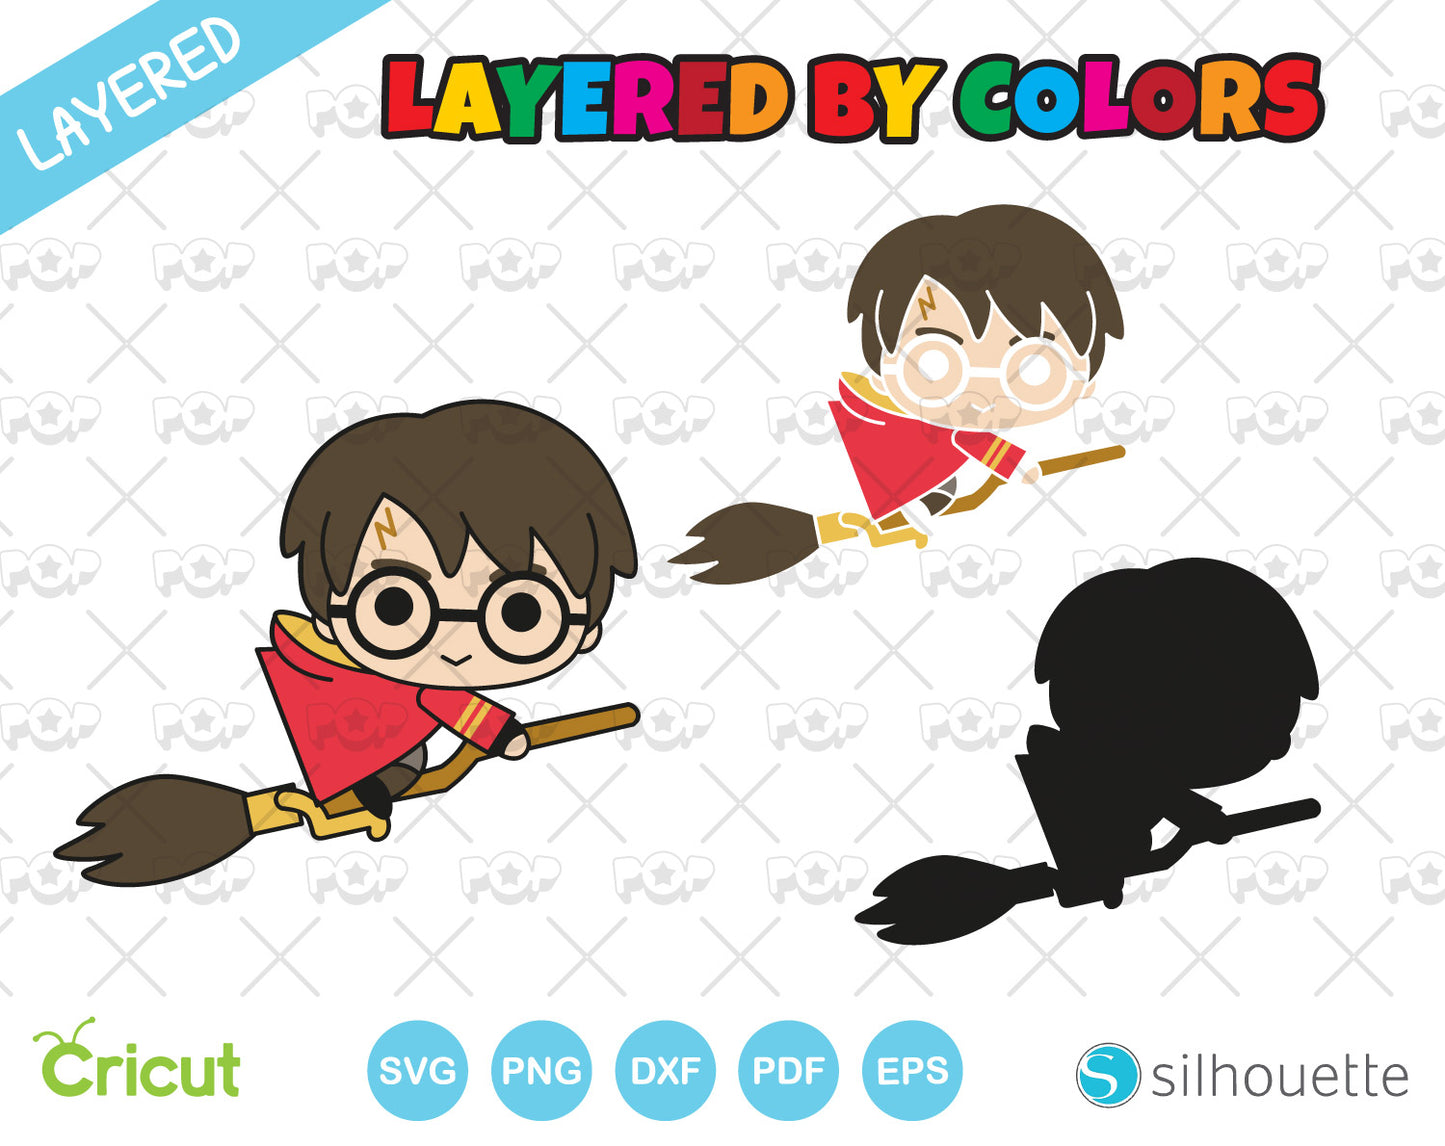 Harry Potter clipart set, Wizard SVG cut files for Cricut / Silhouette, PNG, DXF, instant download